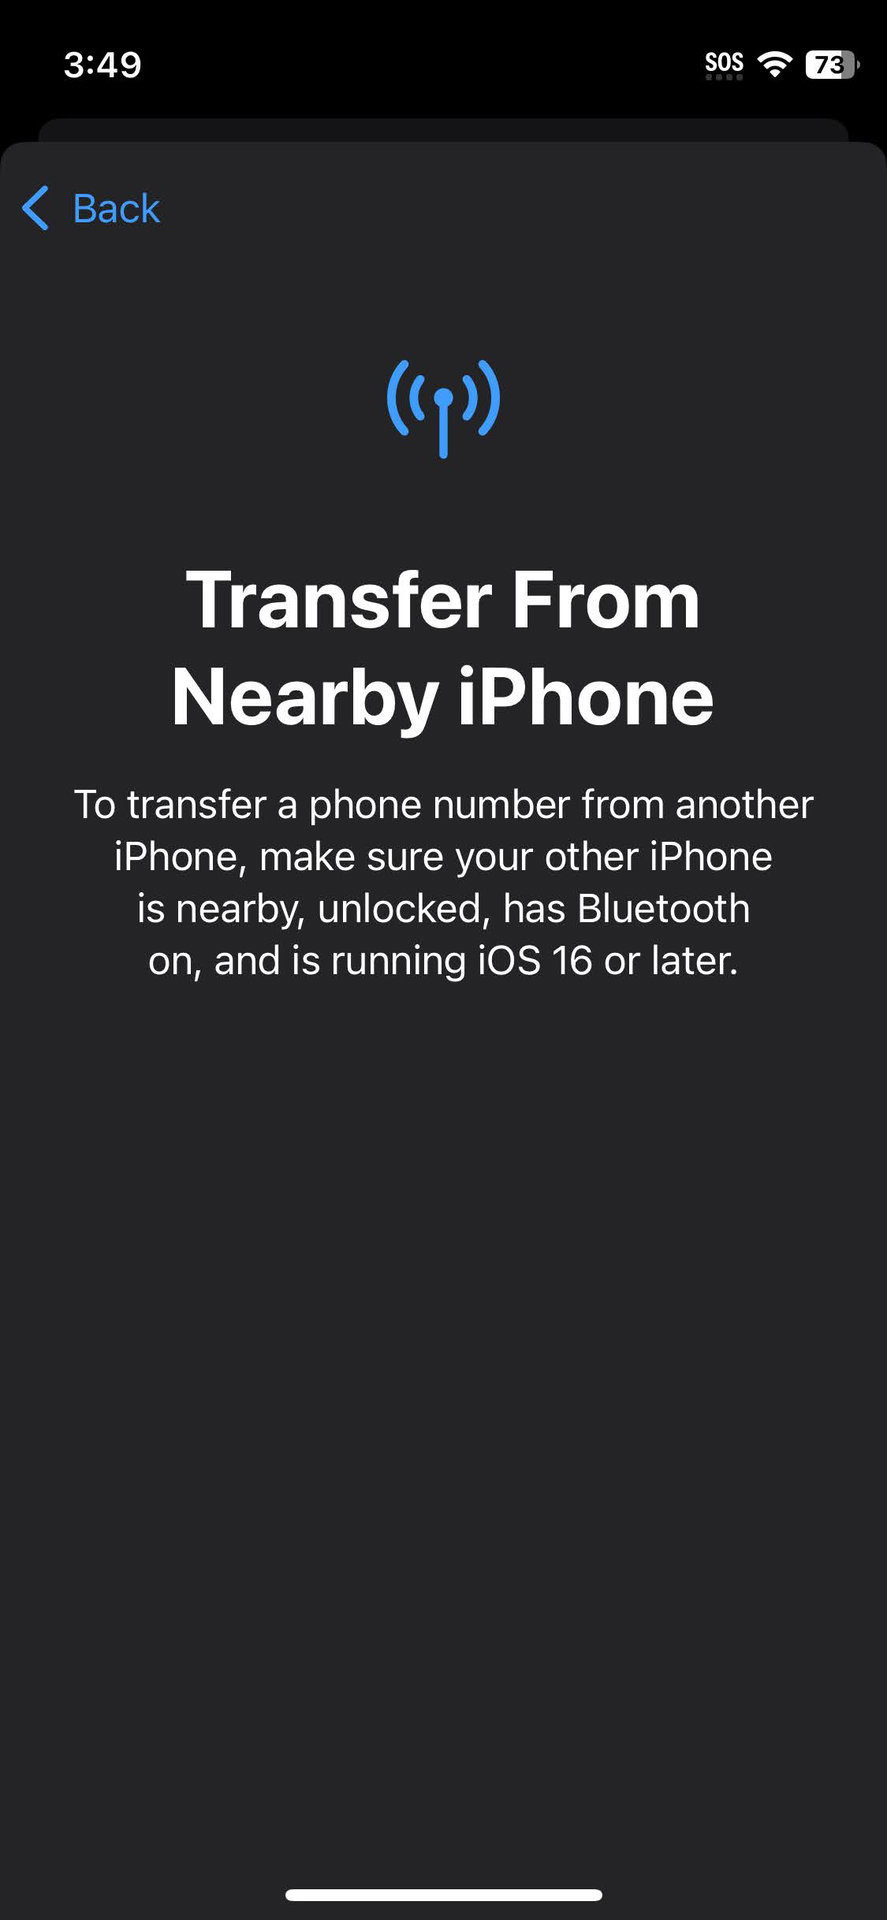 How to use Apple's eSIM Quick Transfer (4)